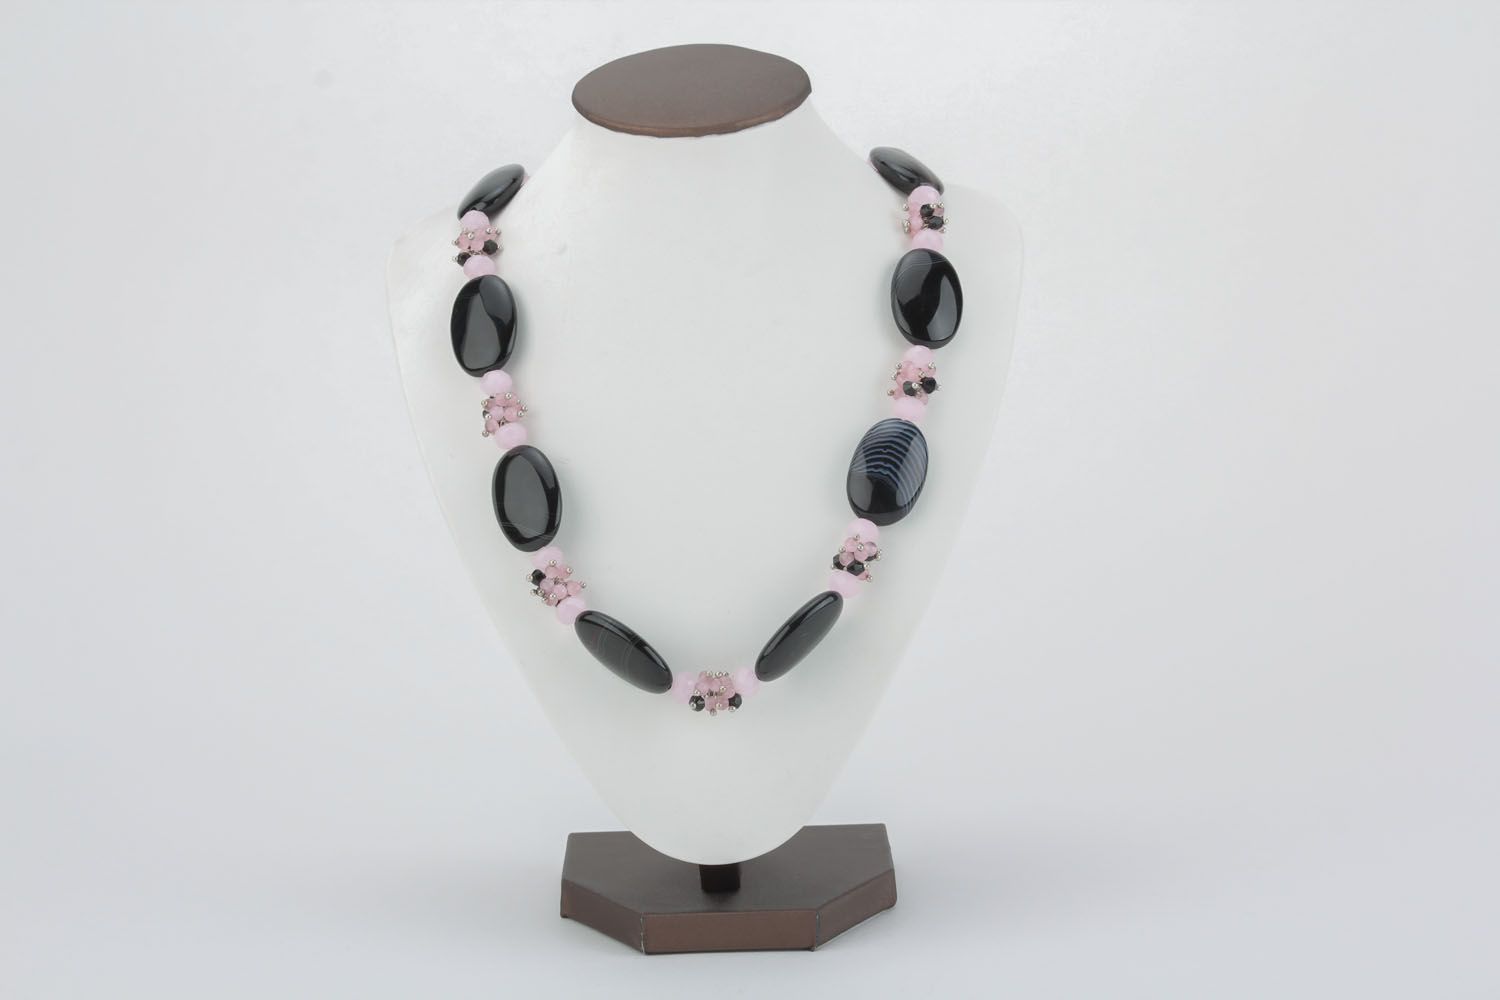 Unusual necklace with natural stones photo 3